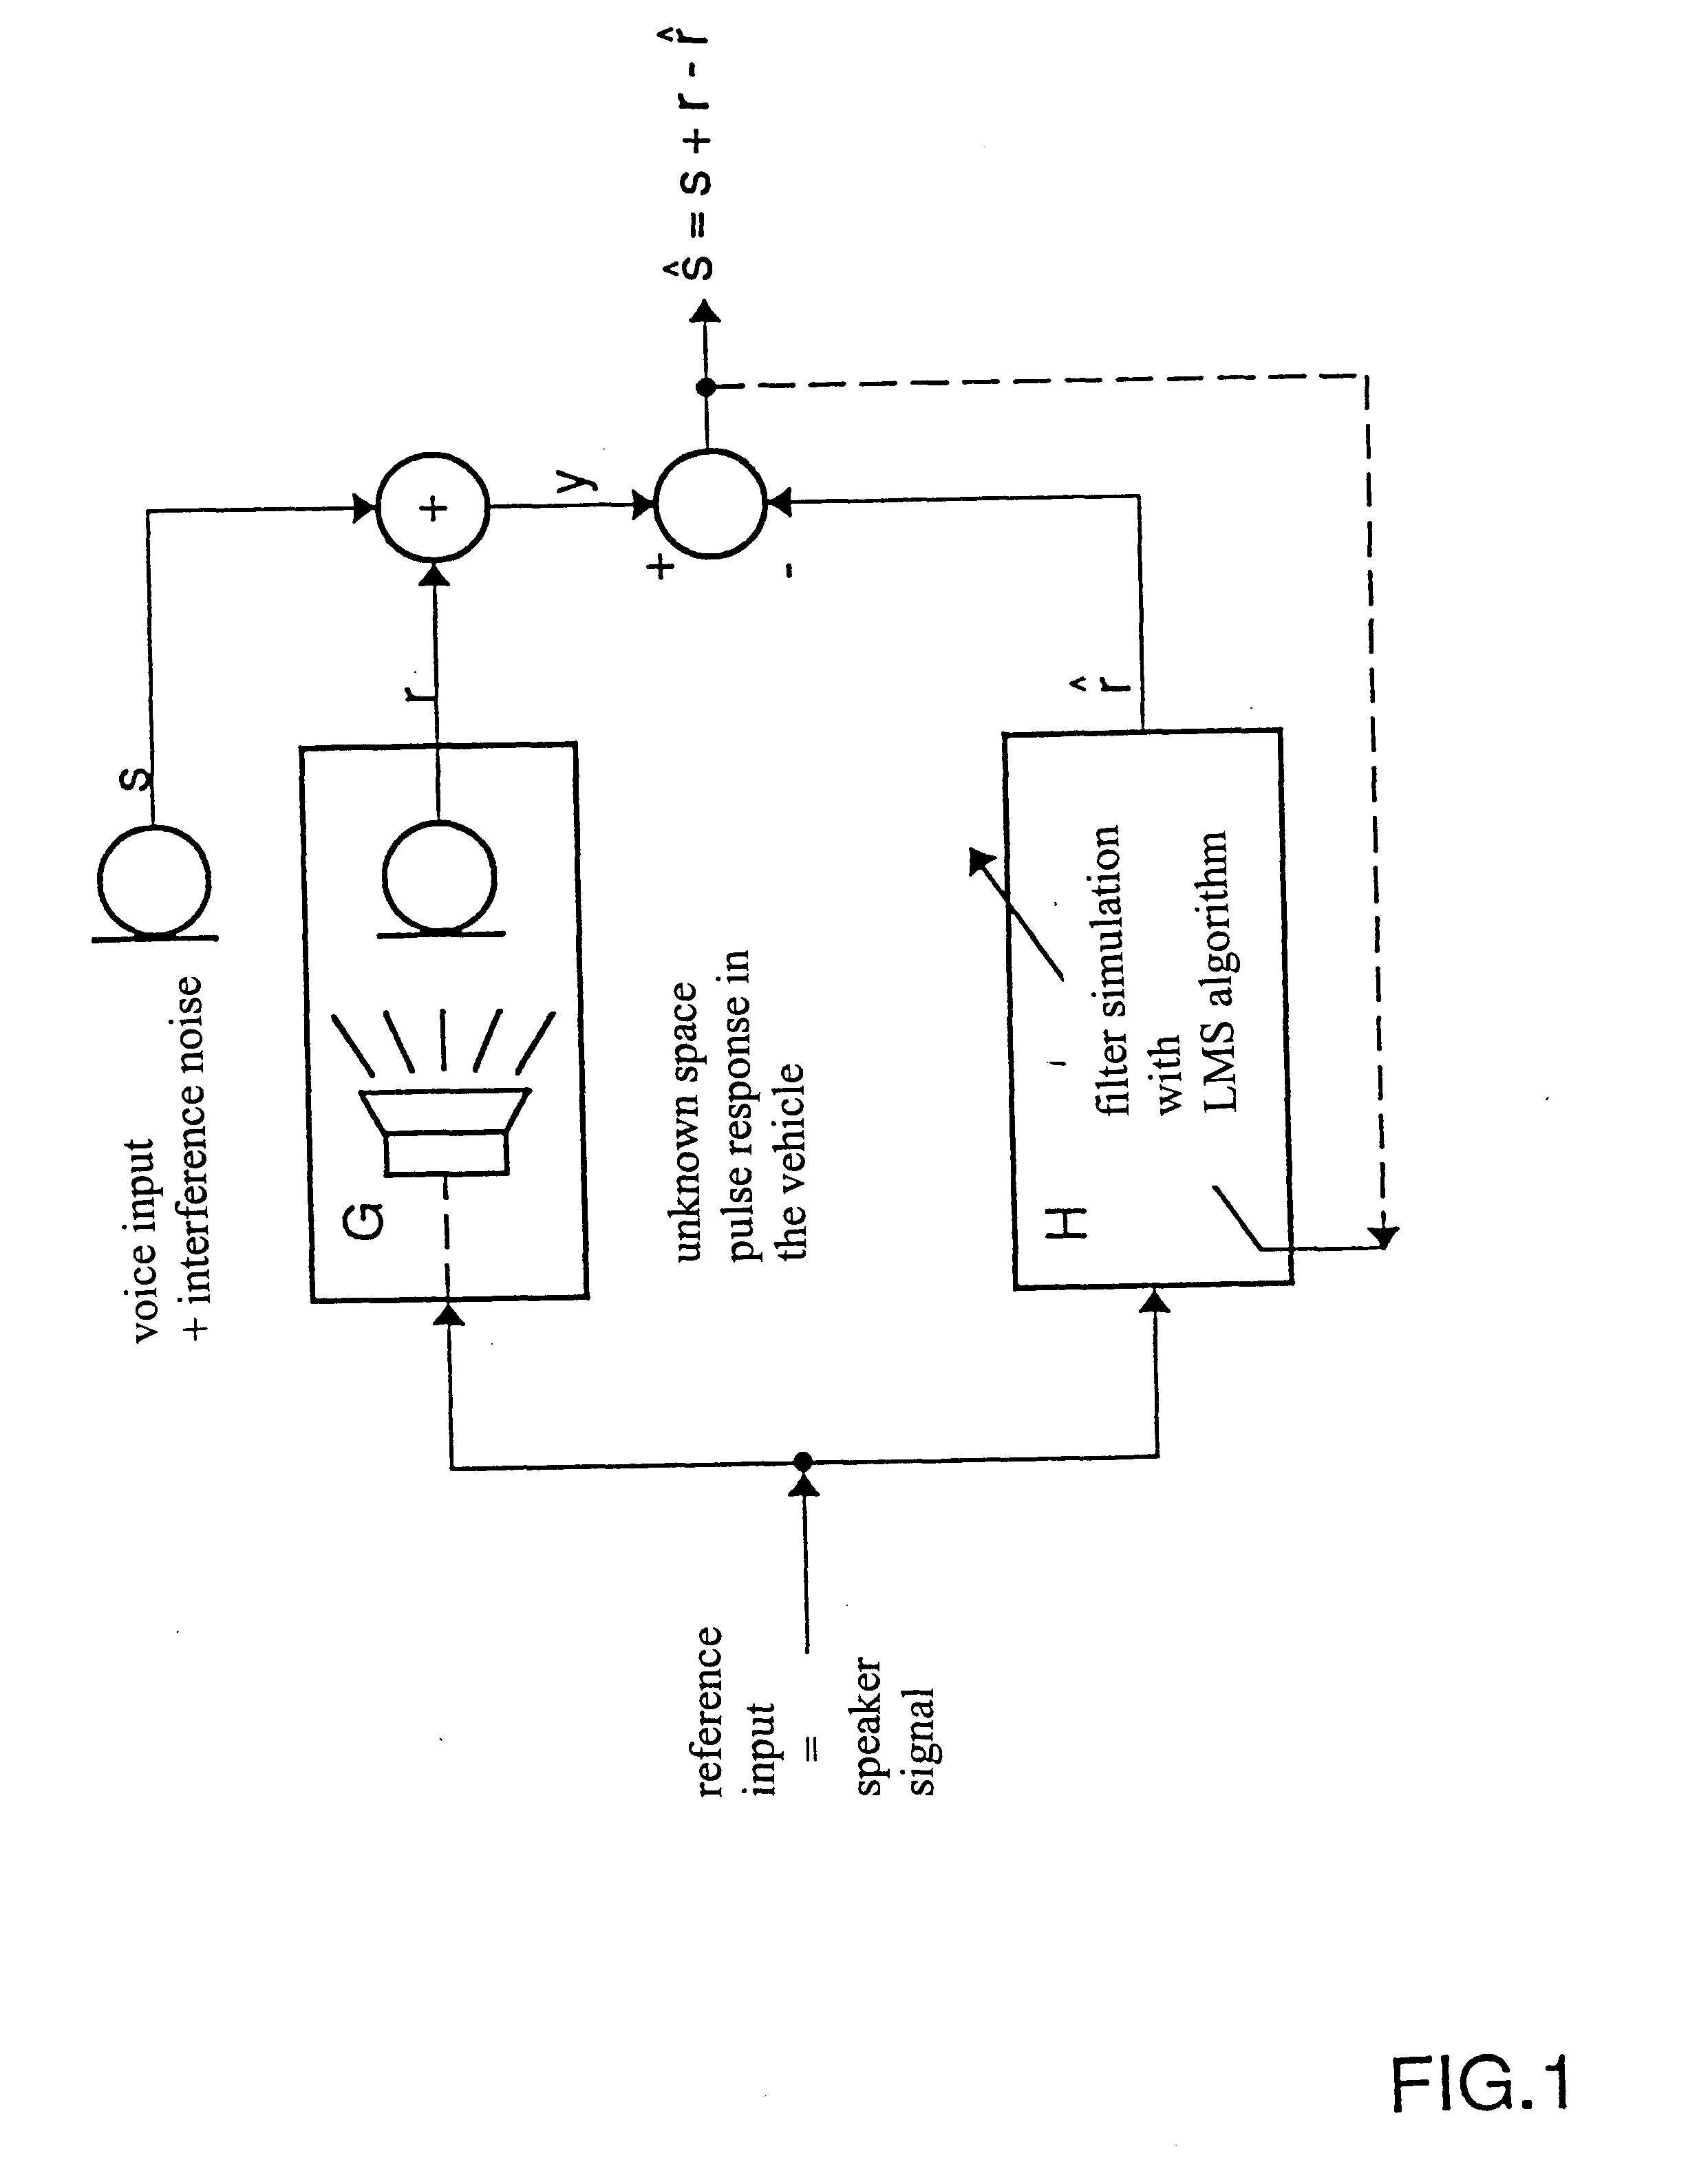 Method of eliminating interference in a microphone